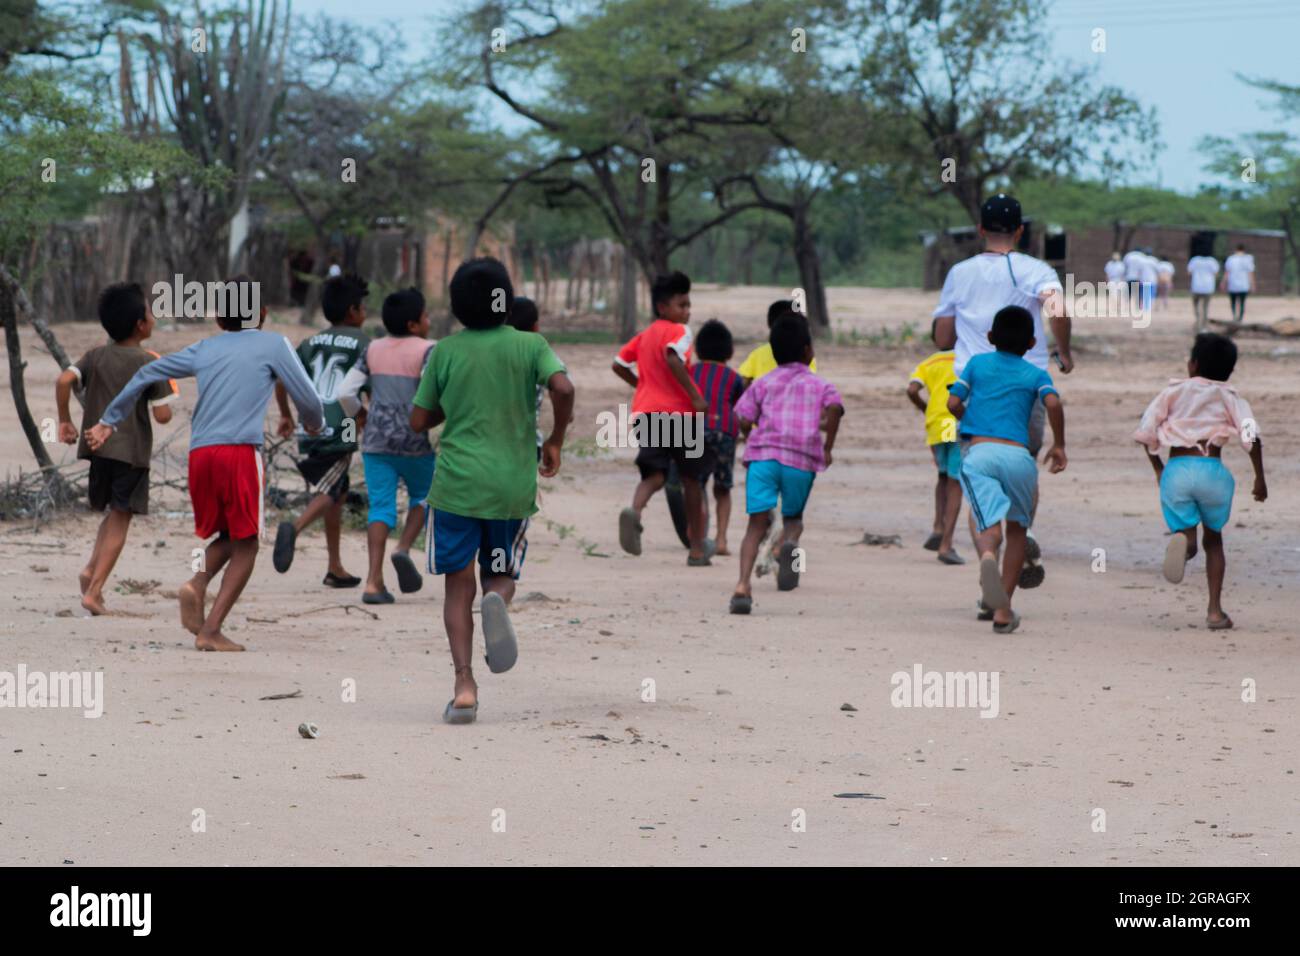 Mayapo, Colombia. 26th Sep, 2021. Several children from Wayuu indigenous communities play during a Humanitarian Mission developed by 'De Corazon Guajira' in Mayapo at La Guajira - Colombia were they visited the Wayuu indigenous communities 'Pactalia, Poromana, Perrohuila' on September 26, 2021. The Guajira region in Colombia is the poorest region in Colombia, with its people commongly living without drinkable water, electricity and food. Credit: Long Visual Press/Alamy Live News Stock Photo